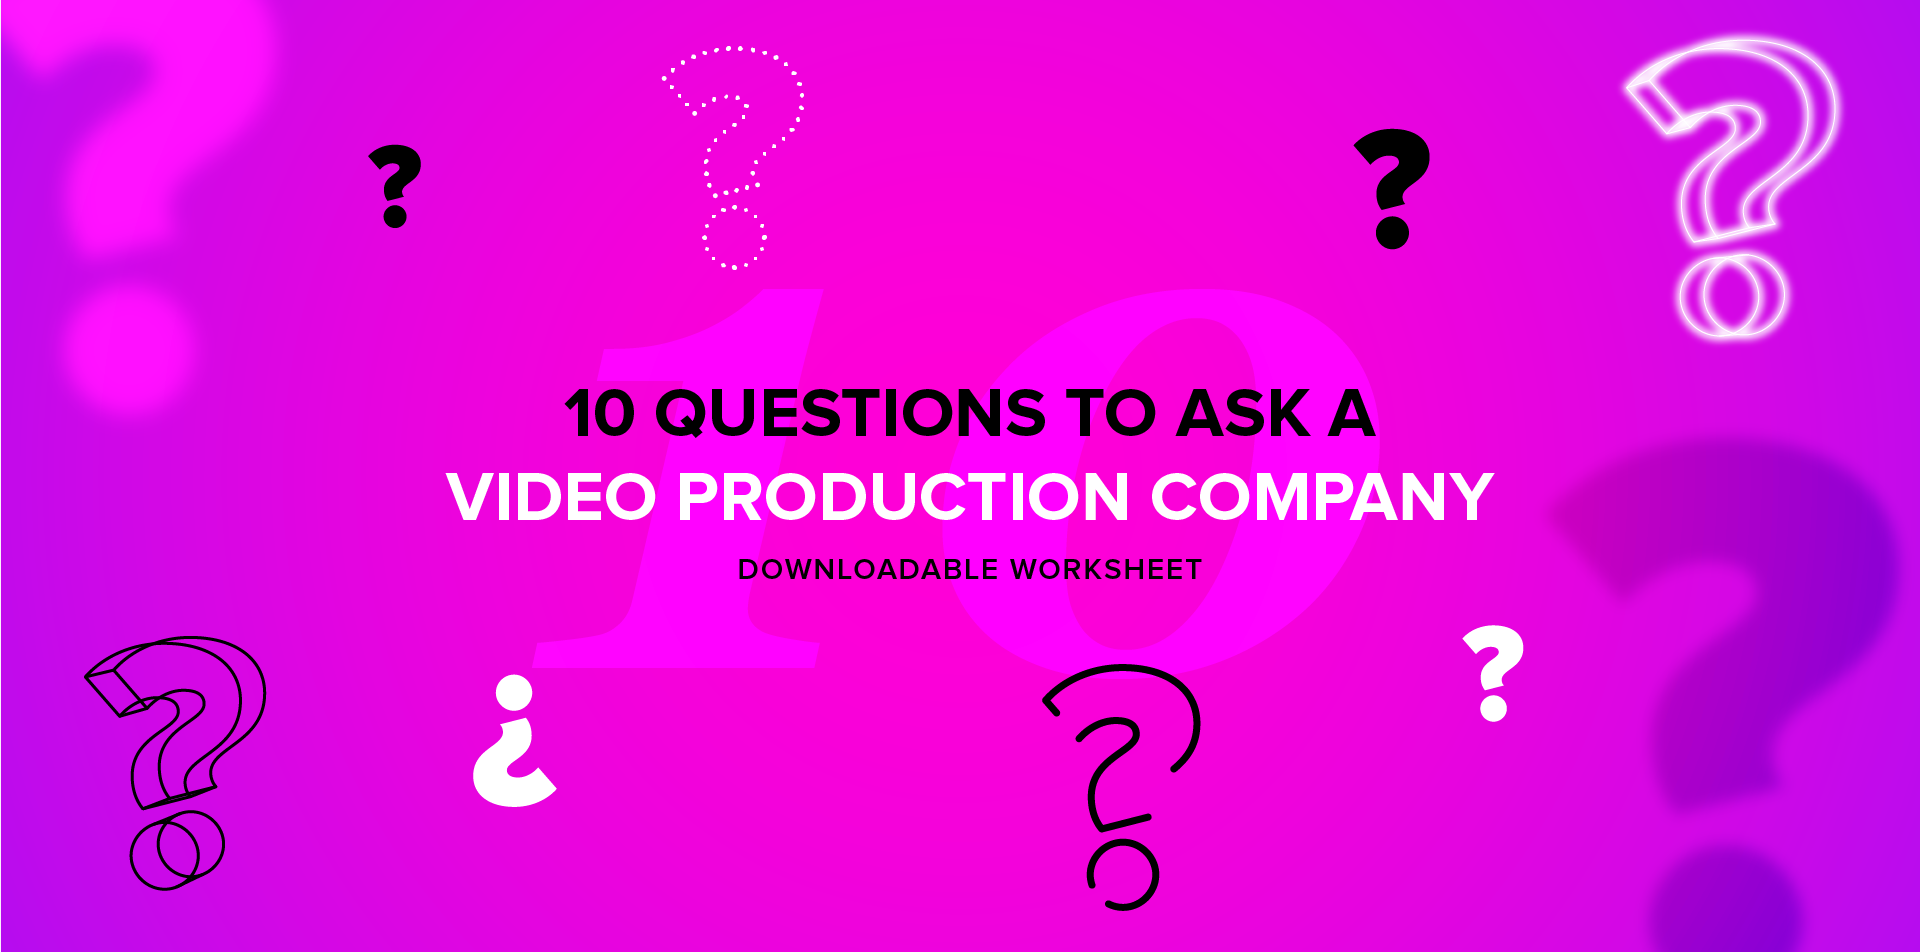 10 questions to ask a video production company worksheet design 